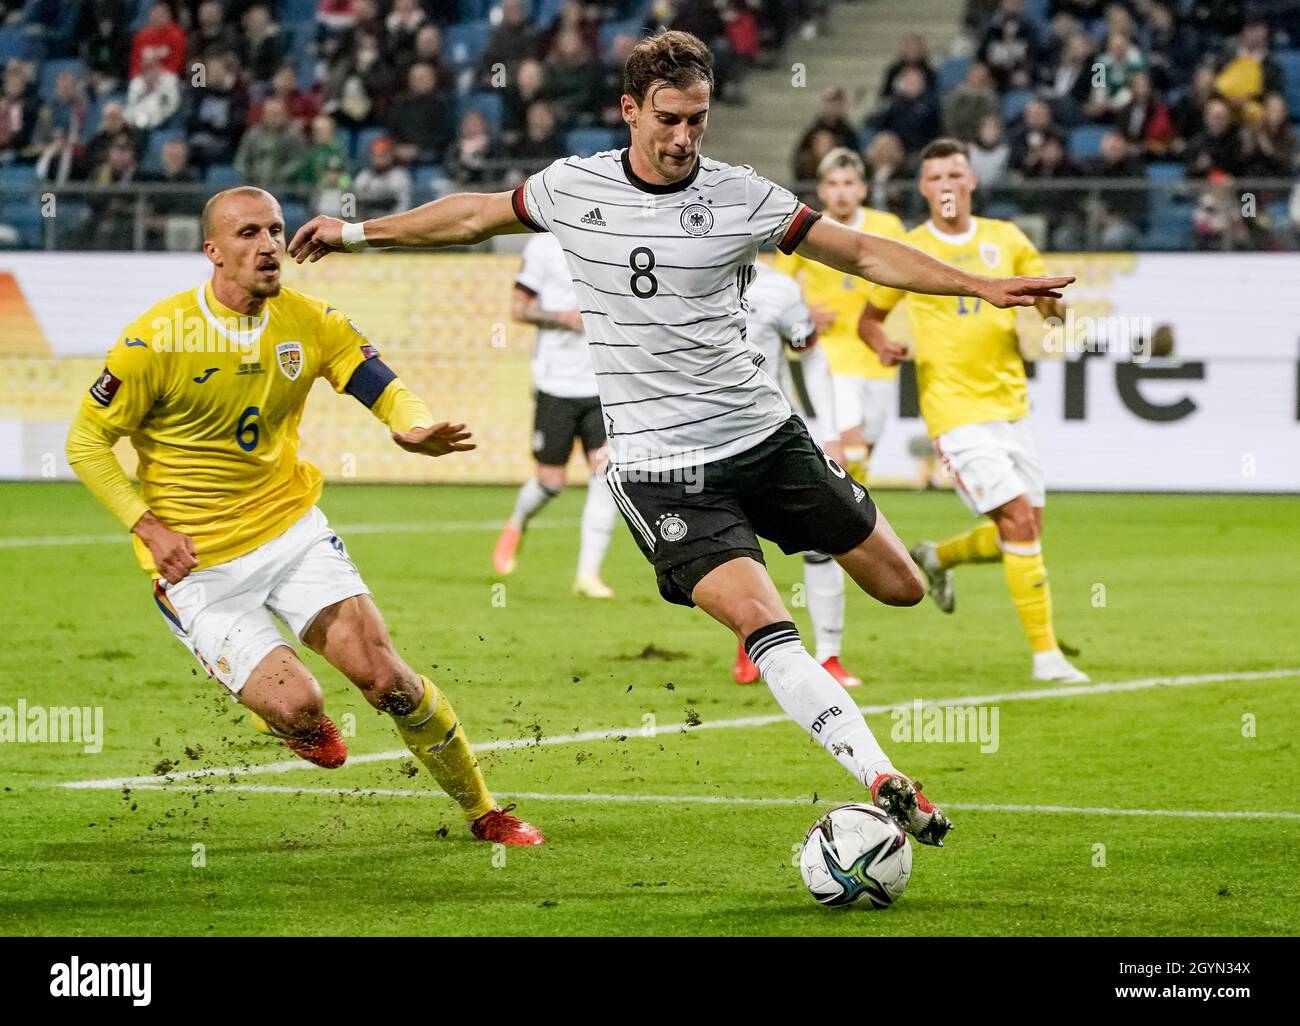 Hamburg, Germany. 08th Oct, 2021. Football: World Cup Qualification Europe, Germany - Romania, Group Stage, Group J, Matchday 7 at Volksparkstadion. Germany's Leon Goretzka (r) and Romania's Vlad Chiriches fight for the ball. Credit: Axel Heimken/dpa/Alamy Live News Stock Photo